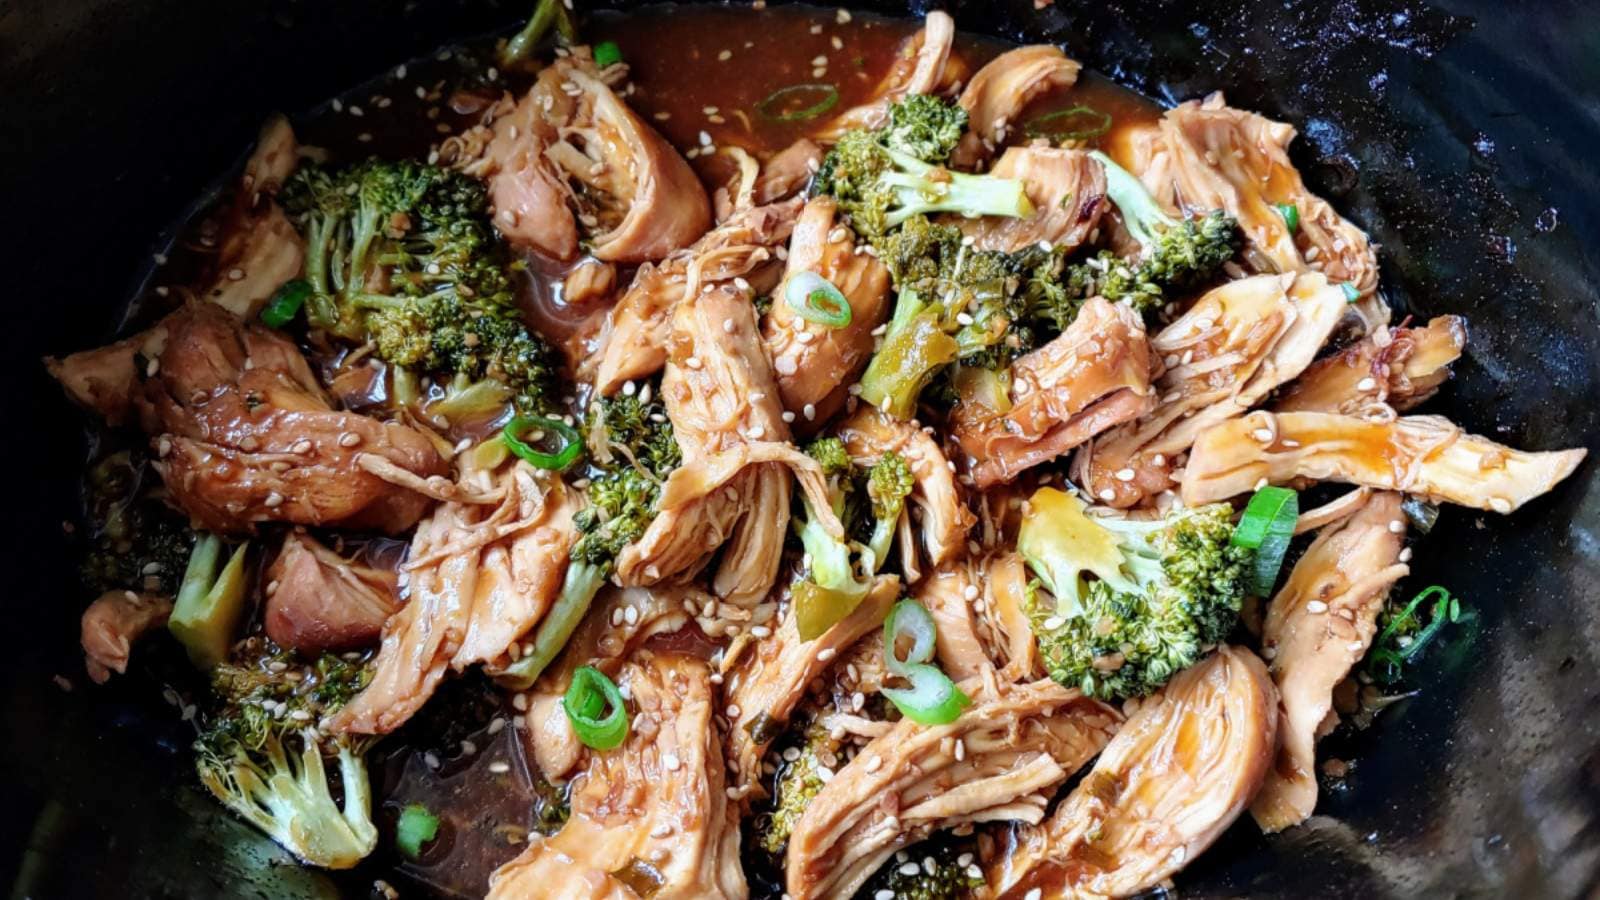 Slow Cooker Teriyaki Chicken And Broccoli recipe by Flavorful Eats.